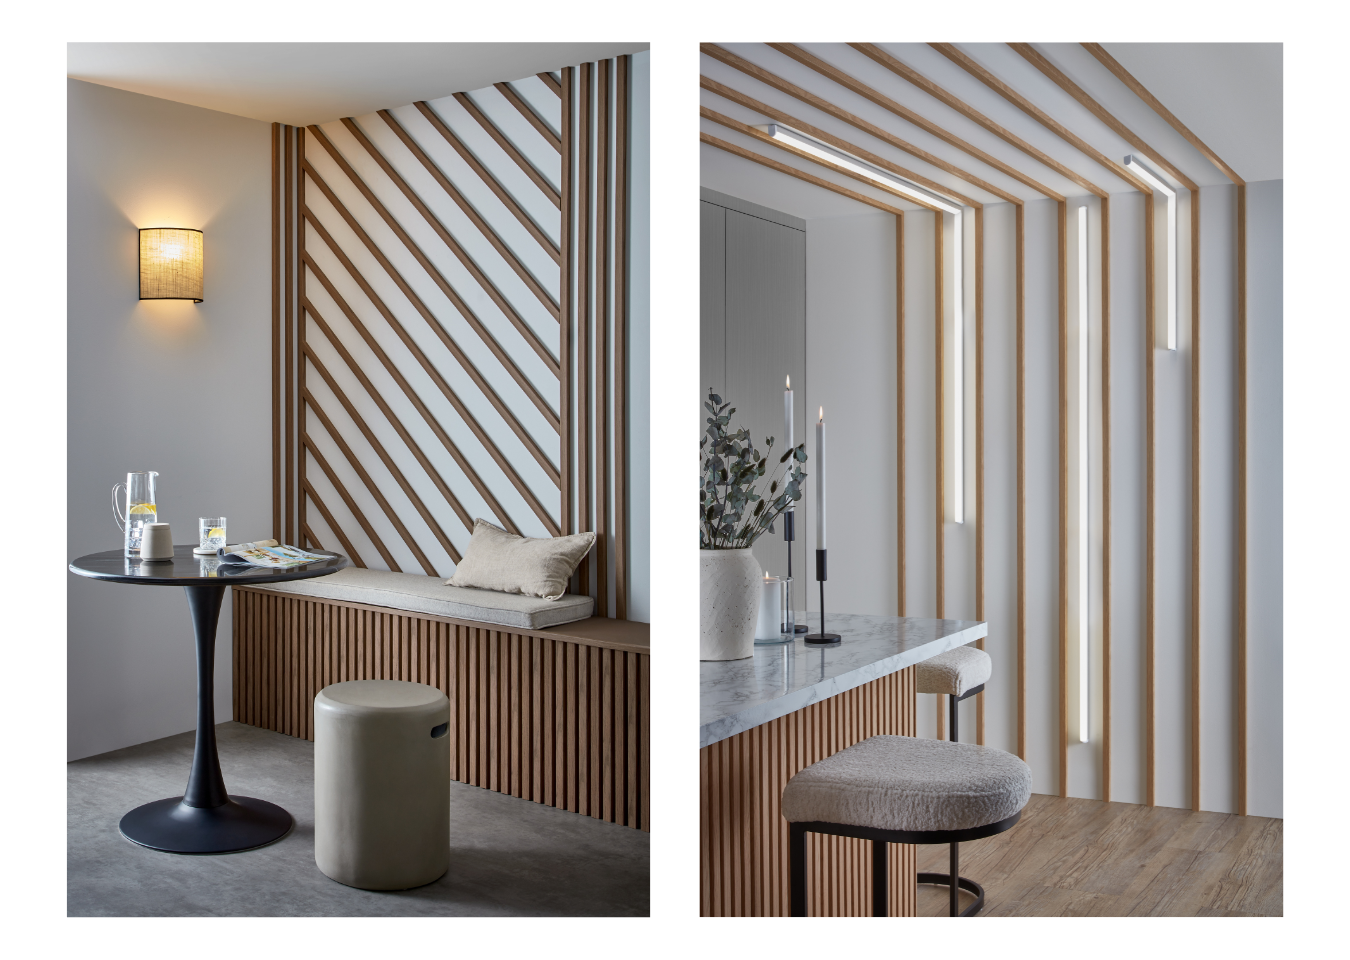 Two images. Left: SlatWall Waterproof panels in walnut around bench with small black table and stool. Waterproof individual slats used on wall behind in a diagonal pattern. Right: Waterproof individual slats spaced out vertically on a wall and onto ceiling. Strip lighting between the slats. Corner of kitchen island shown with bar stool.